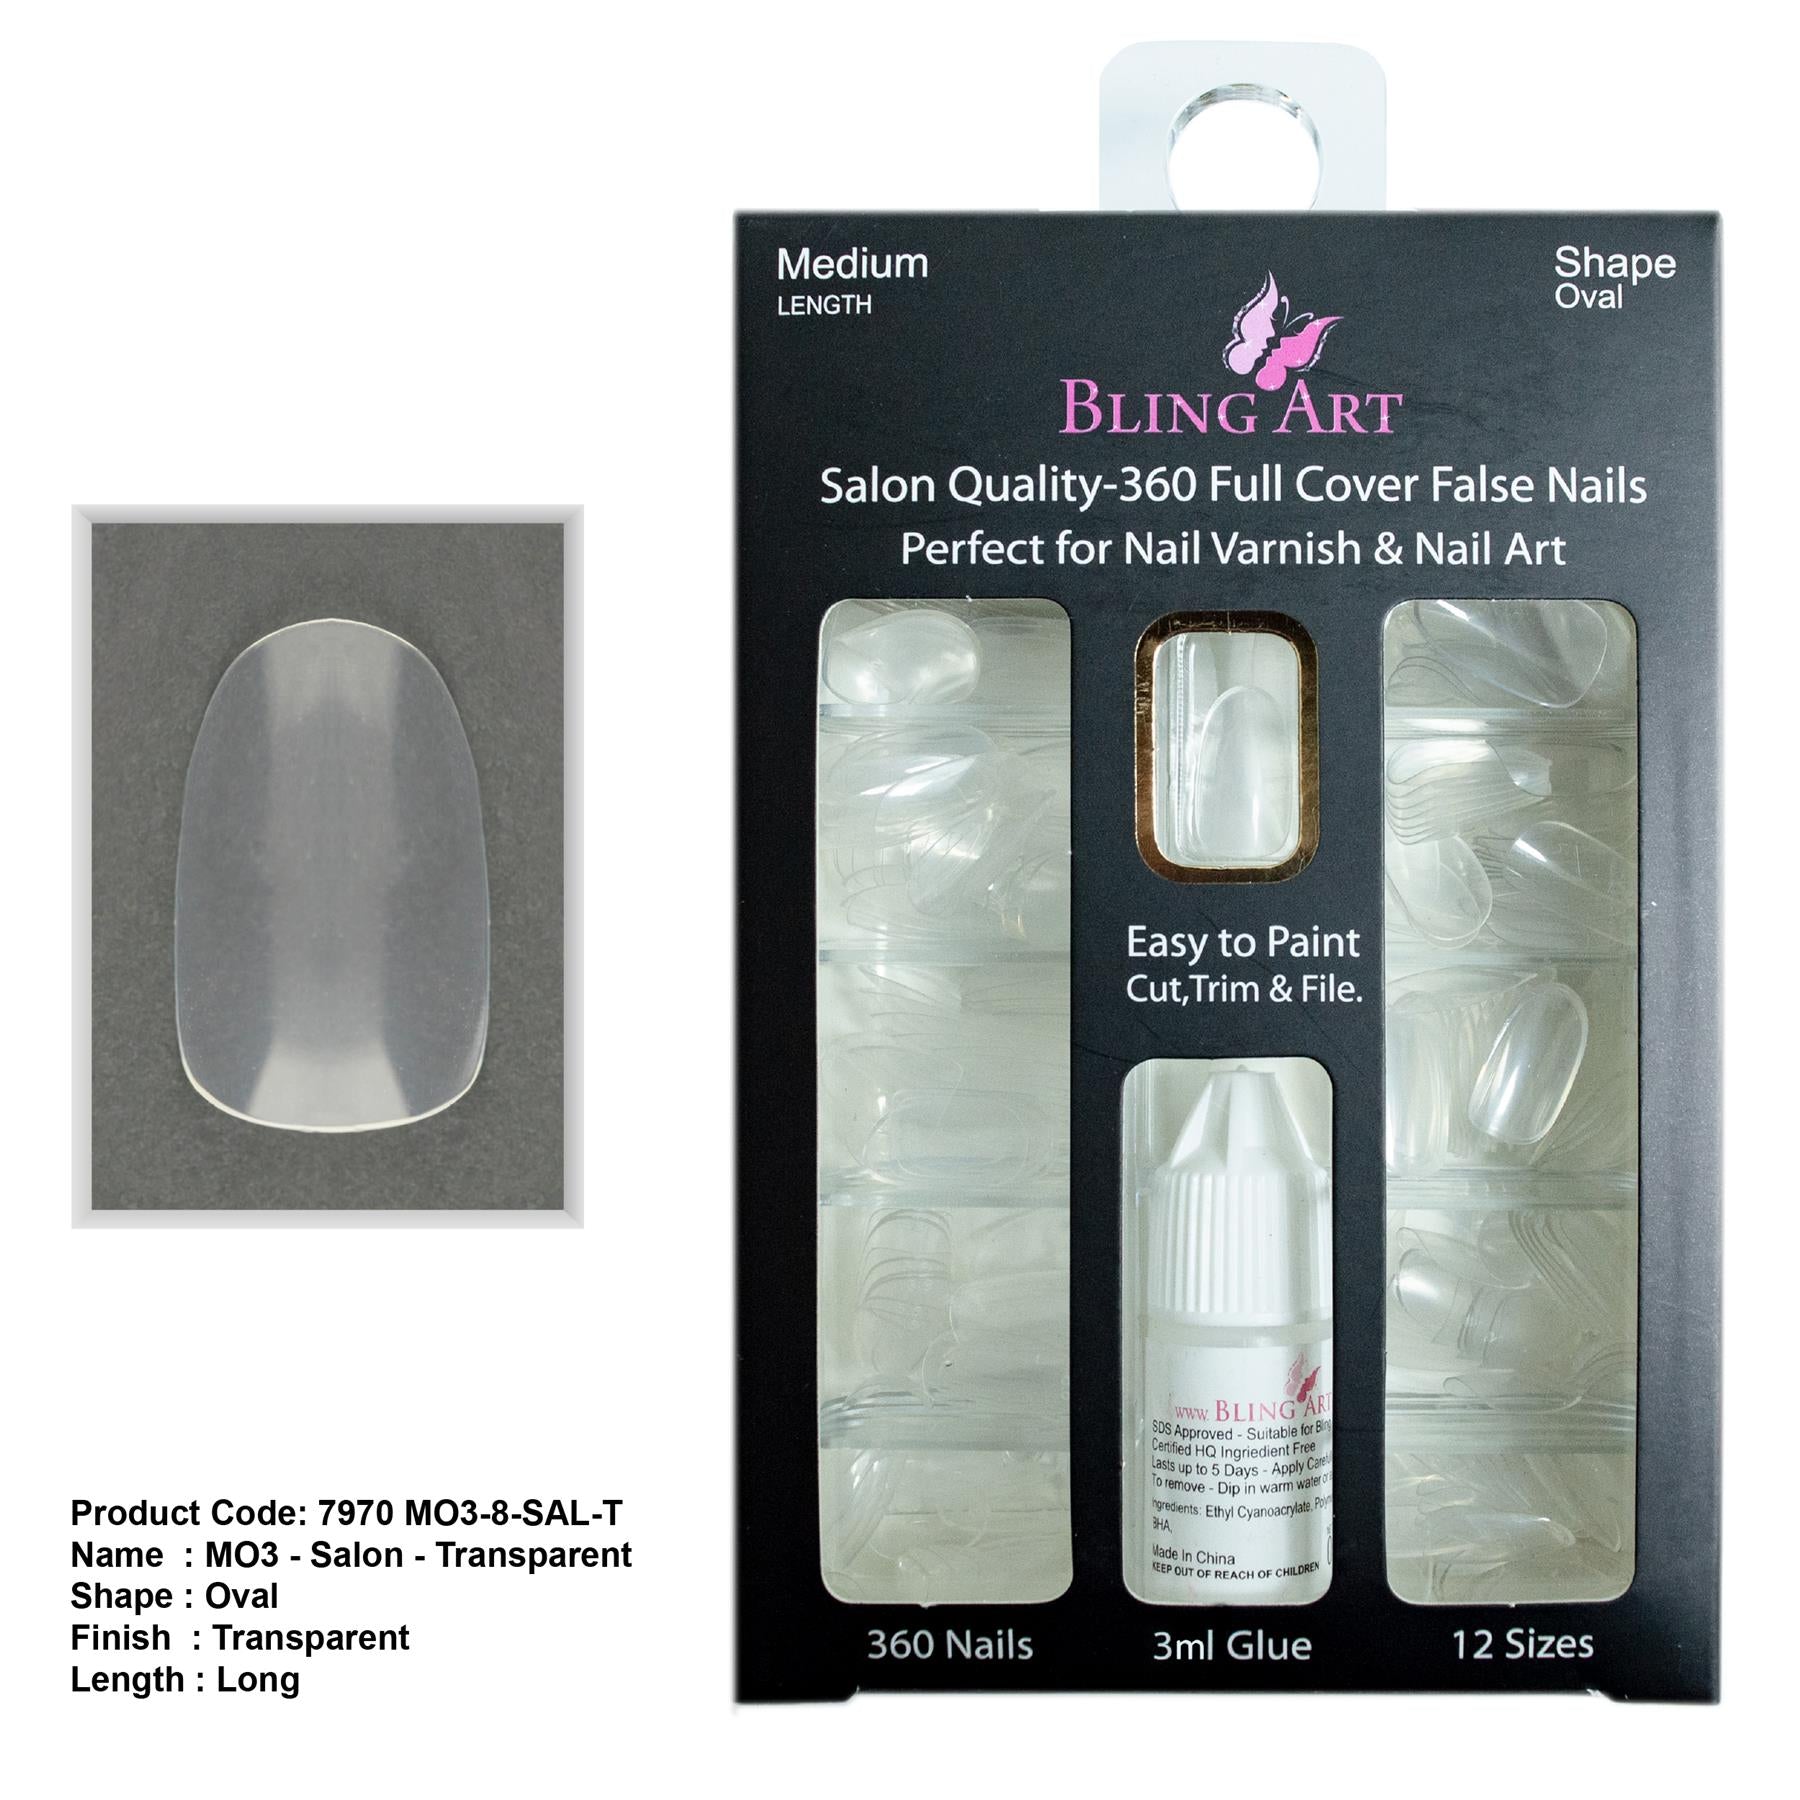 False Nails by Bling Art 360 Oval Medium Transparent Acrylic Fake Nail Tips without glue